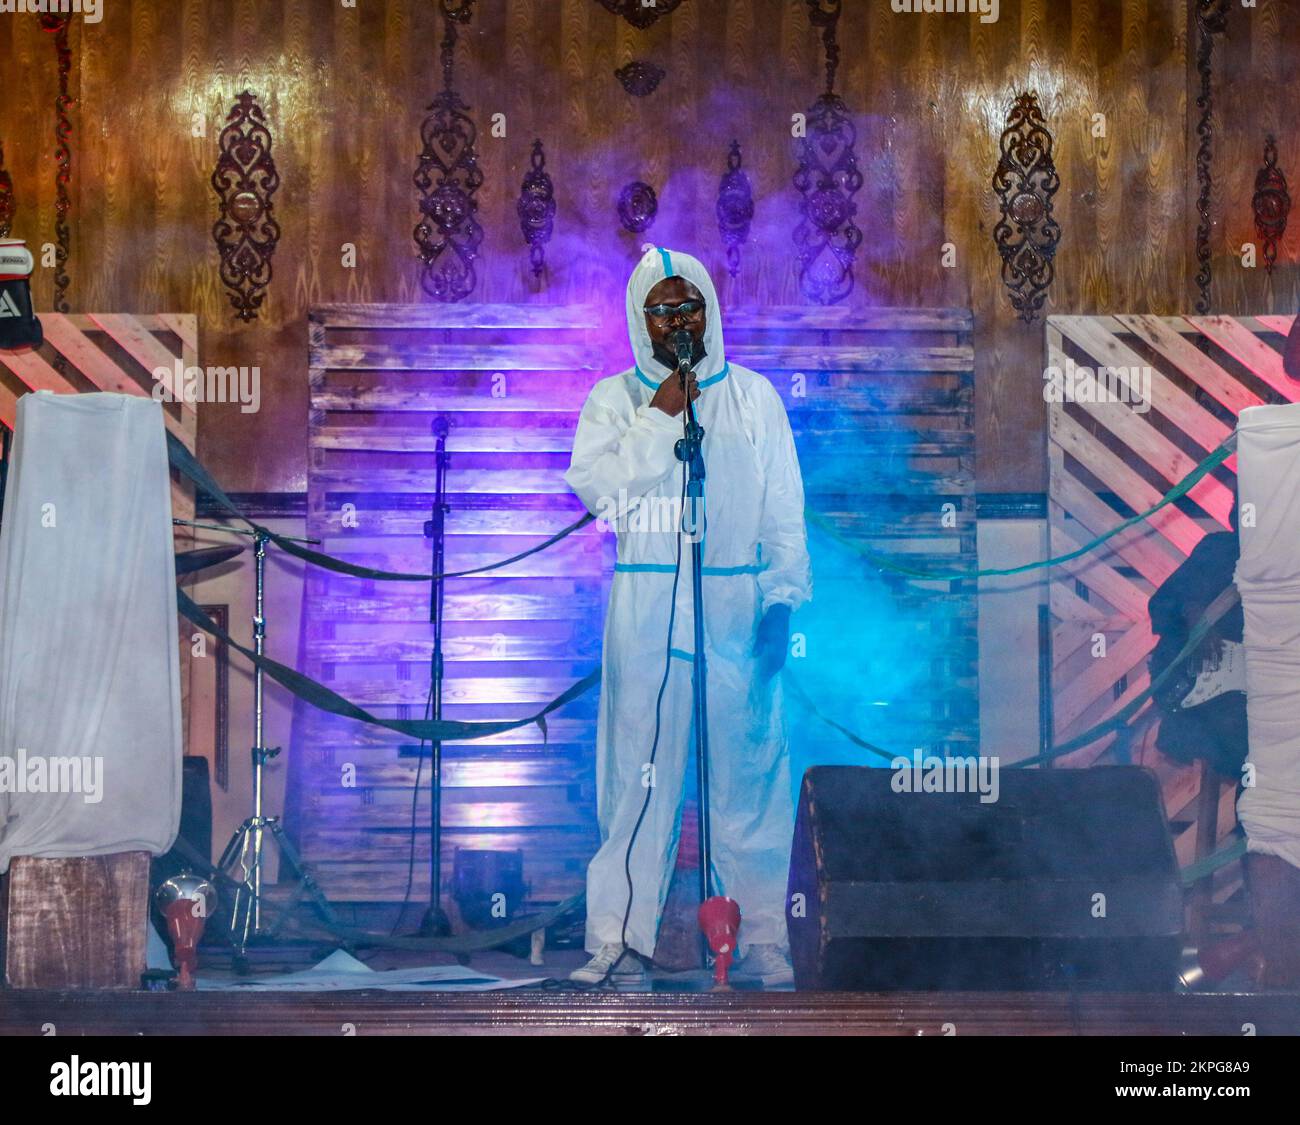 Nakuru, Kenya. 27th Nov, 2022. Spoken word artist Gregory Ochieng, who goes by stage name ''Mbunge Aliyeparara'' dressed in personal protective equipment (PPE) coverall, performs onstage during the release of his #Vitavyavina or ‘War of words' poetry album. Mbunge's poetry mainly highlights injustices and social issues in Kenya, among them, extrajudicial killings, profiling, government-sponsored enforced disappearances, and corruption, topics many regards as too risky to talk about. Credit: SOPA Images Limited/Alamy Live News Stock Photo